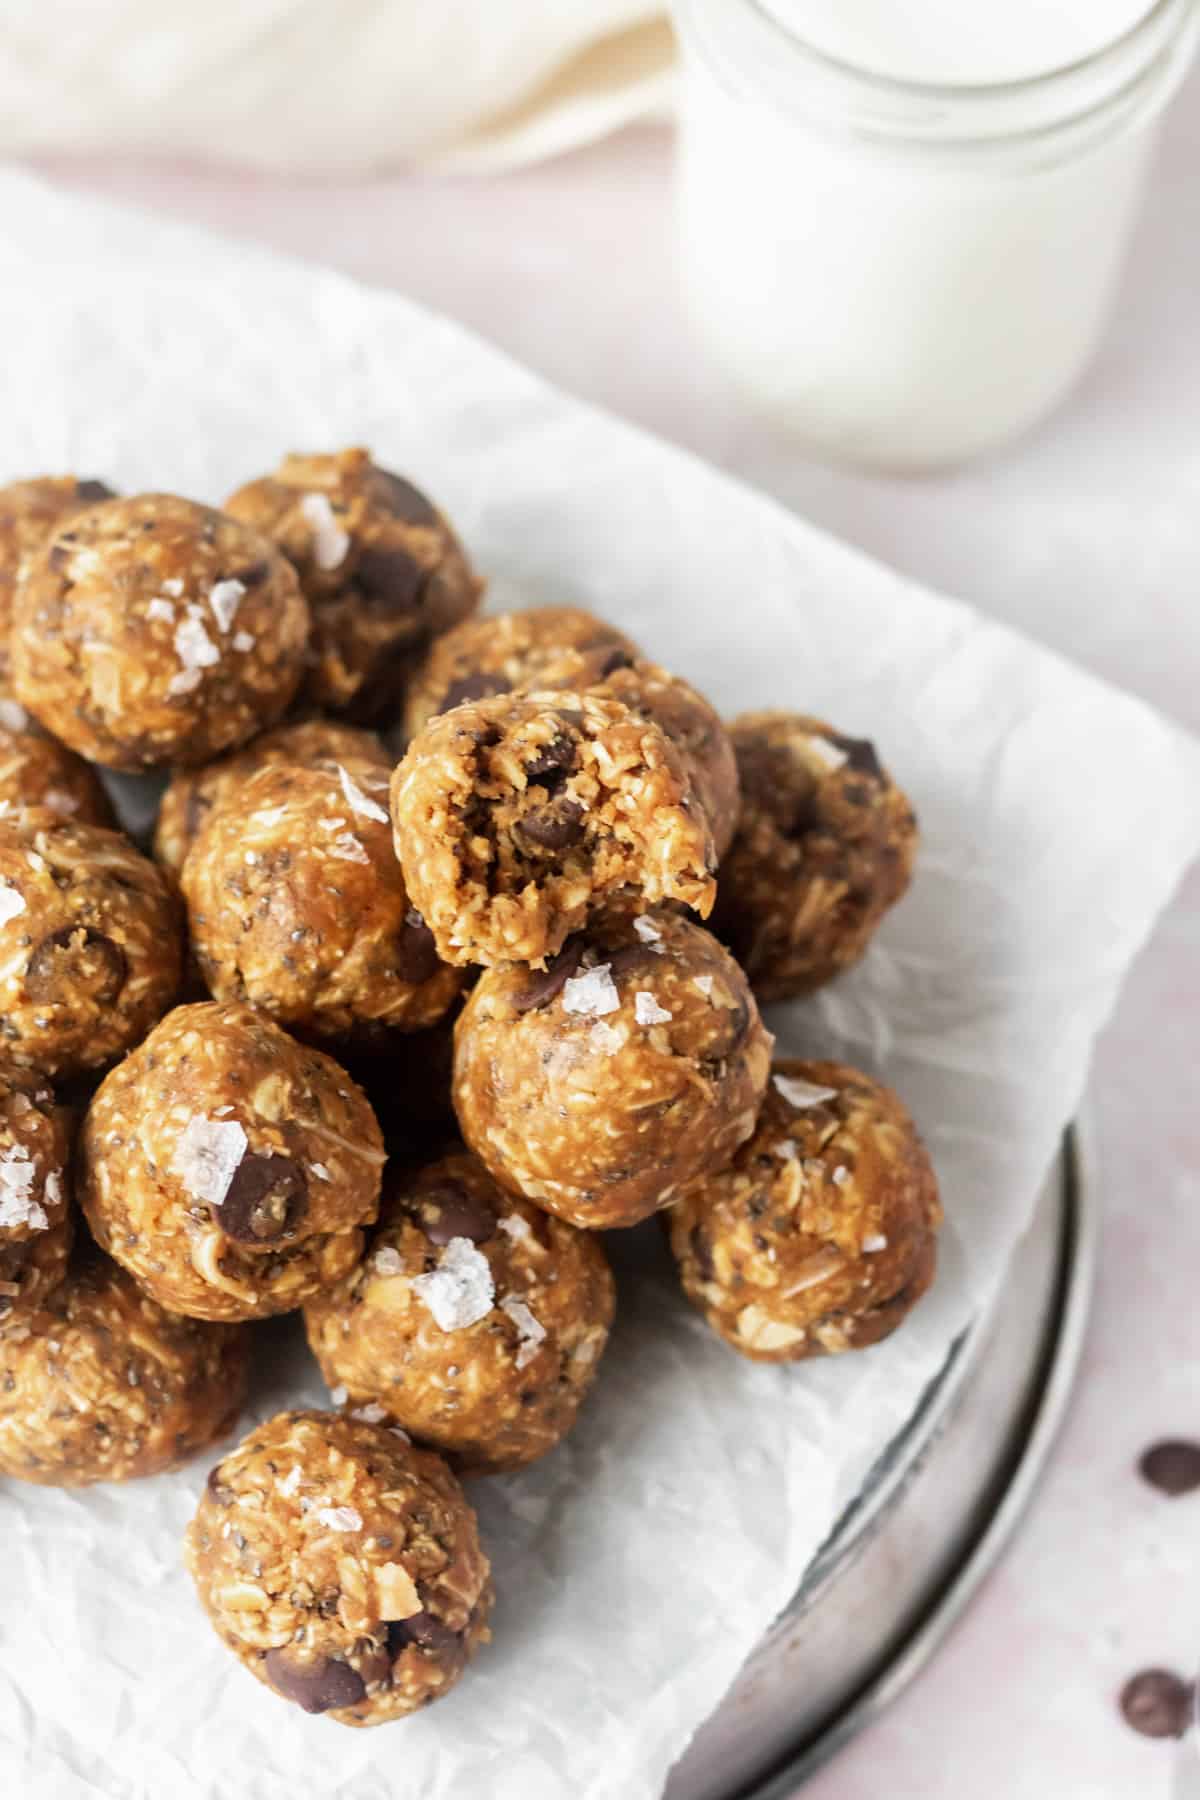 A stack of protein balls on parchment paper. One has a bite taken out of it.